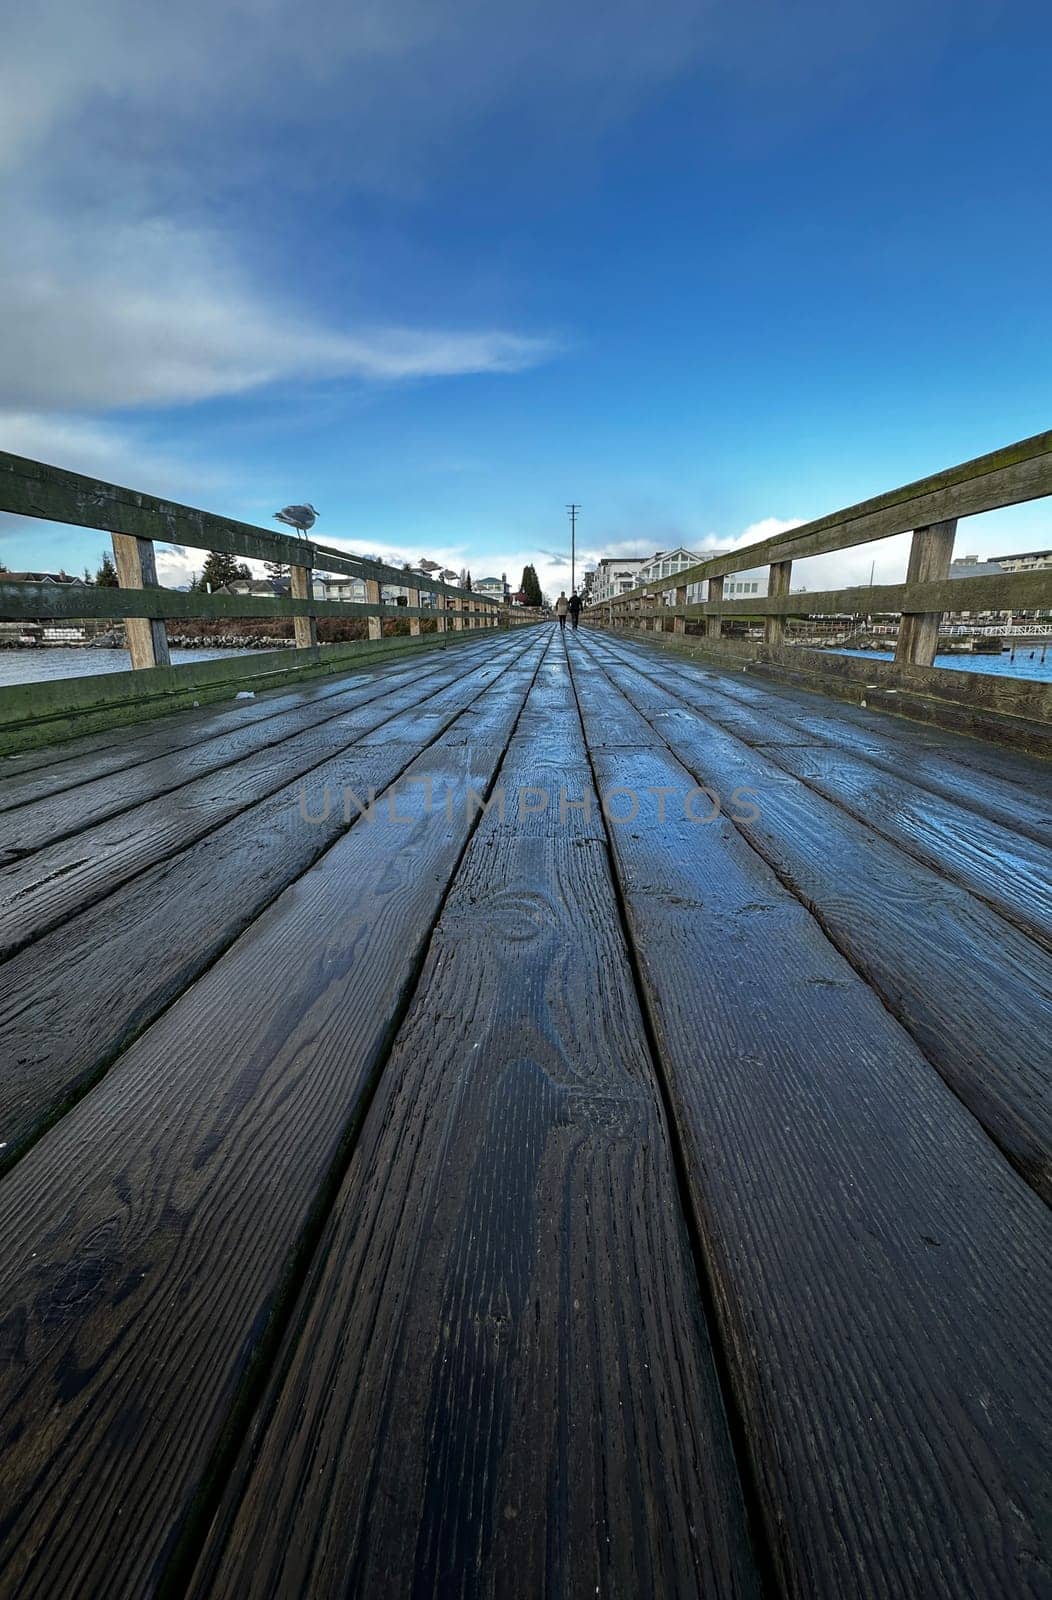 Low angle of wooden fishing pier in Sidney, British Columbia by Granchinho